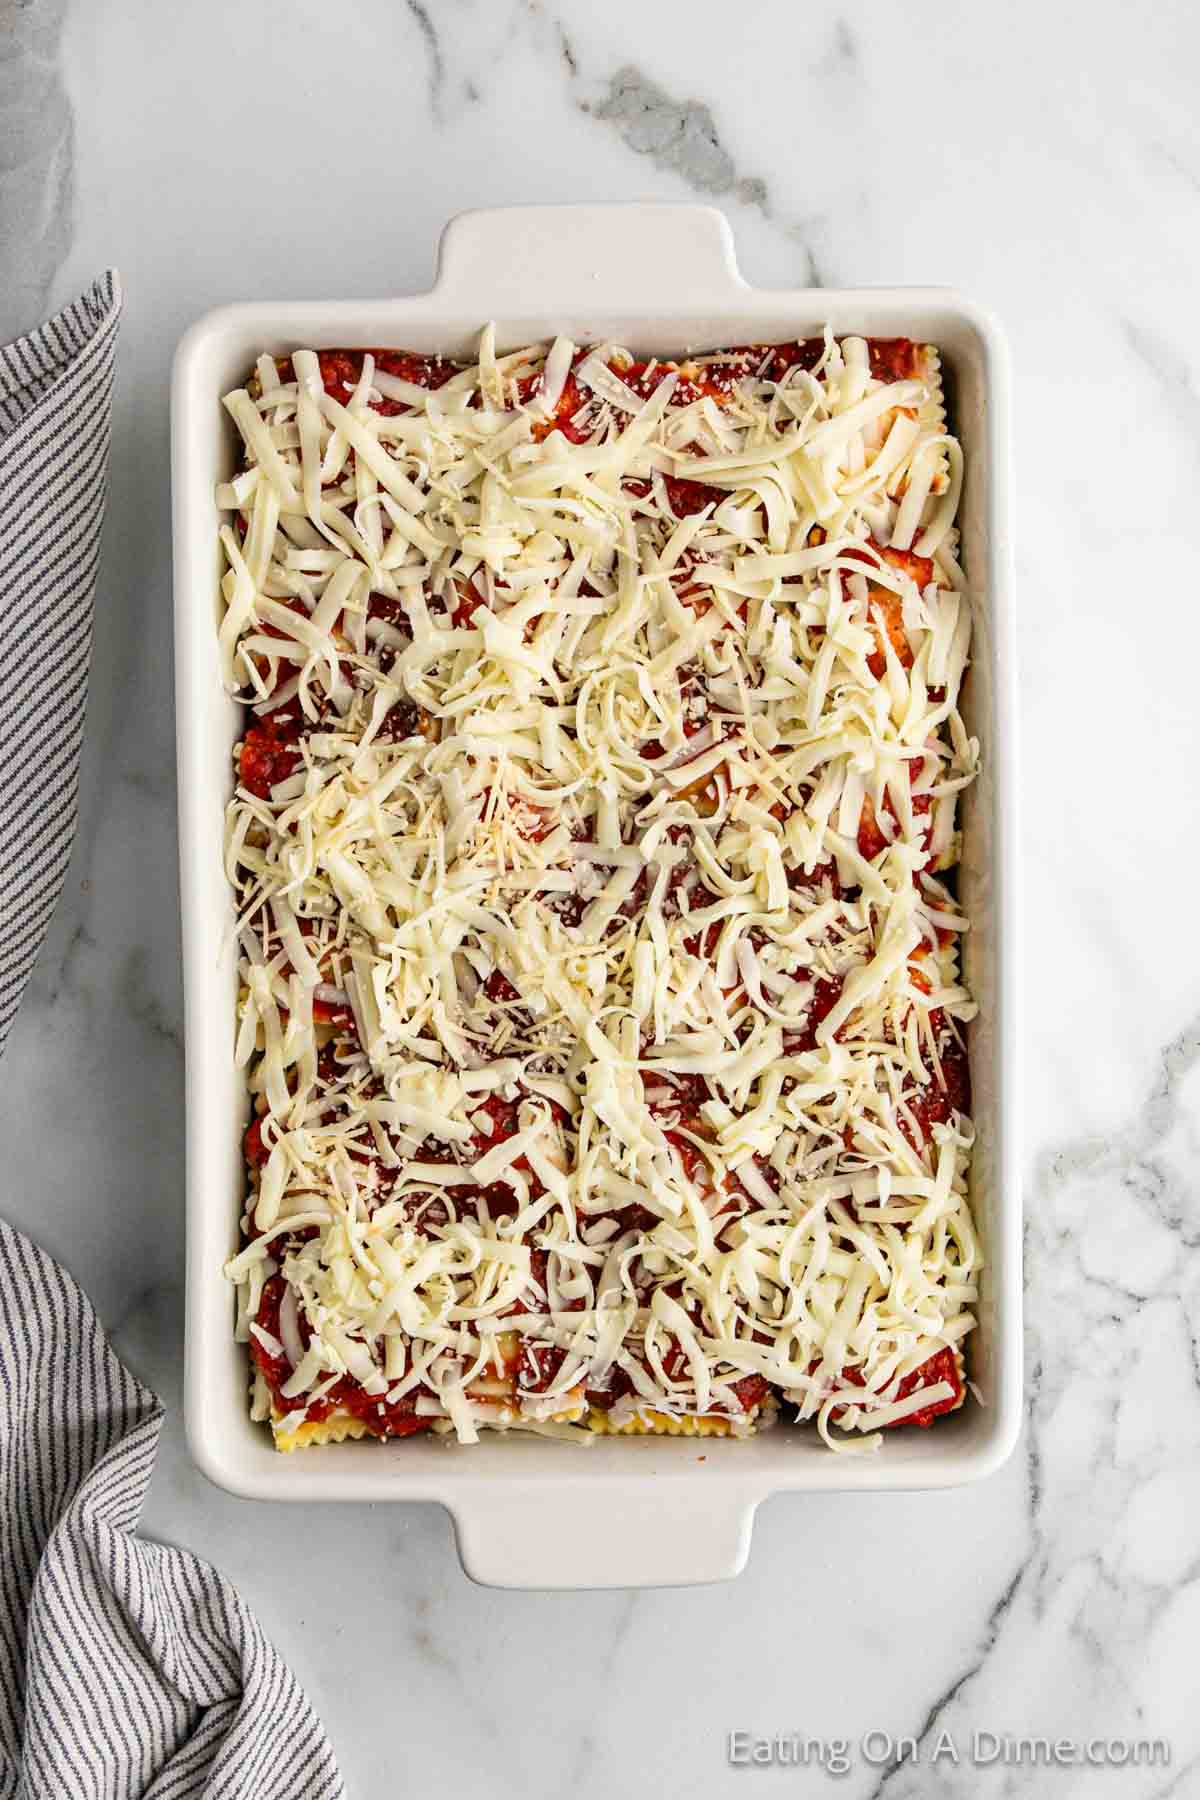 Topping the meat sauce and shredded cheese in a casserole dish